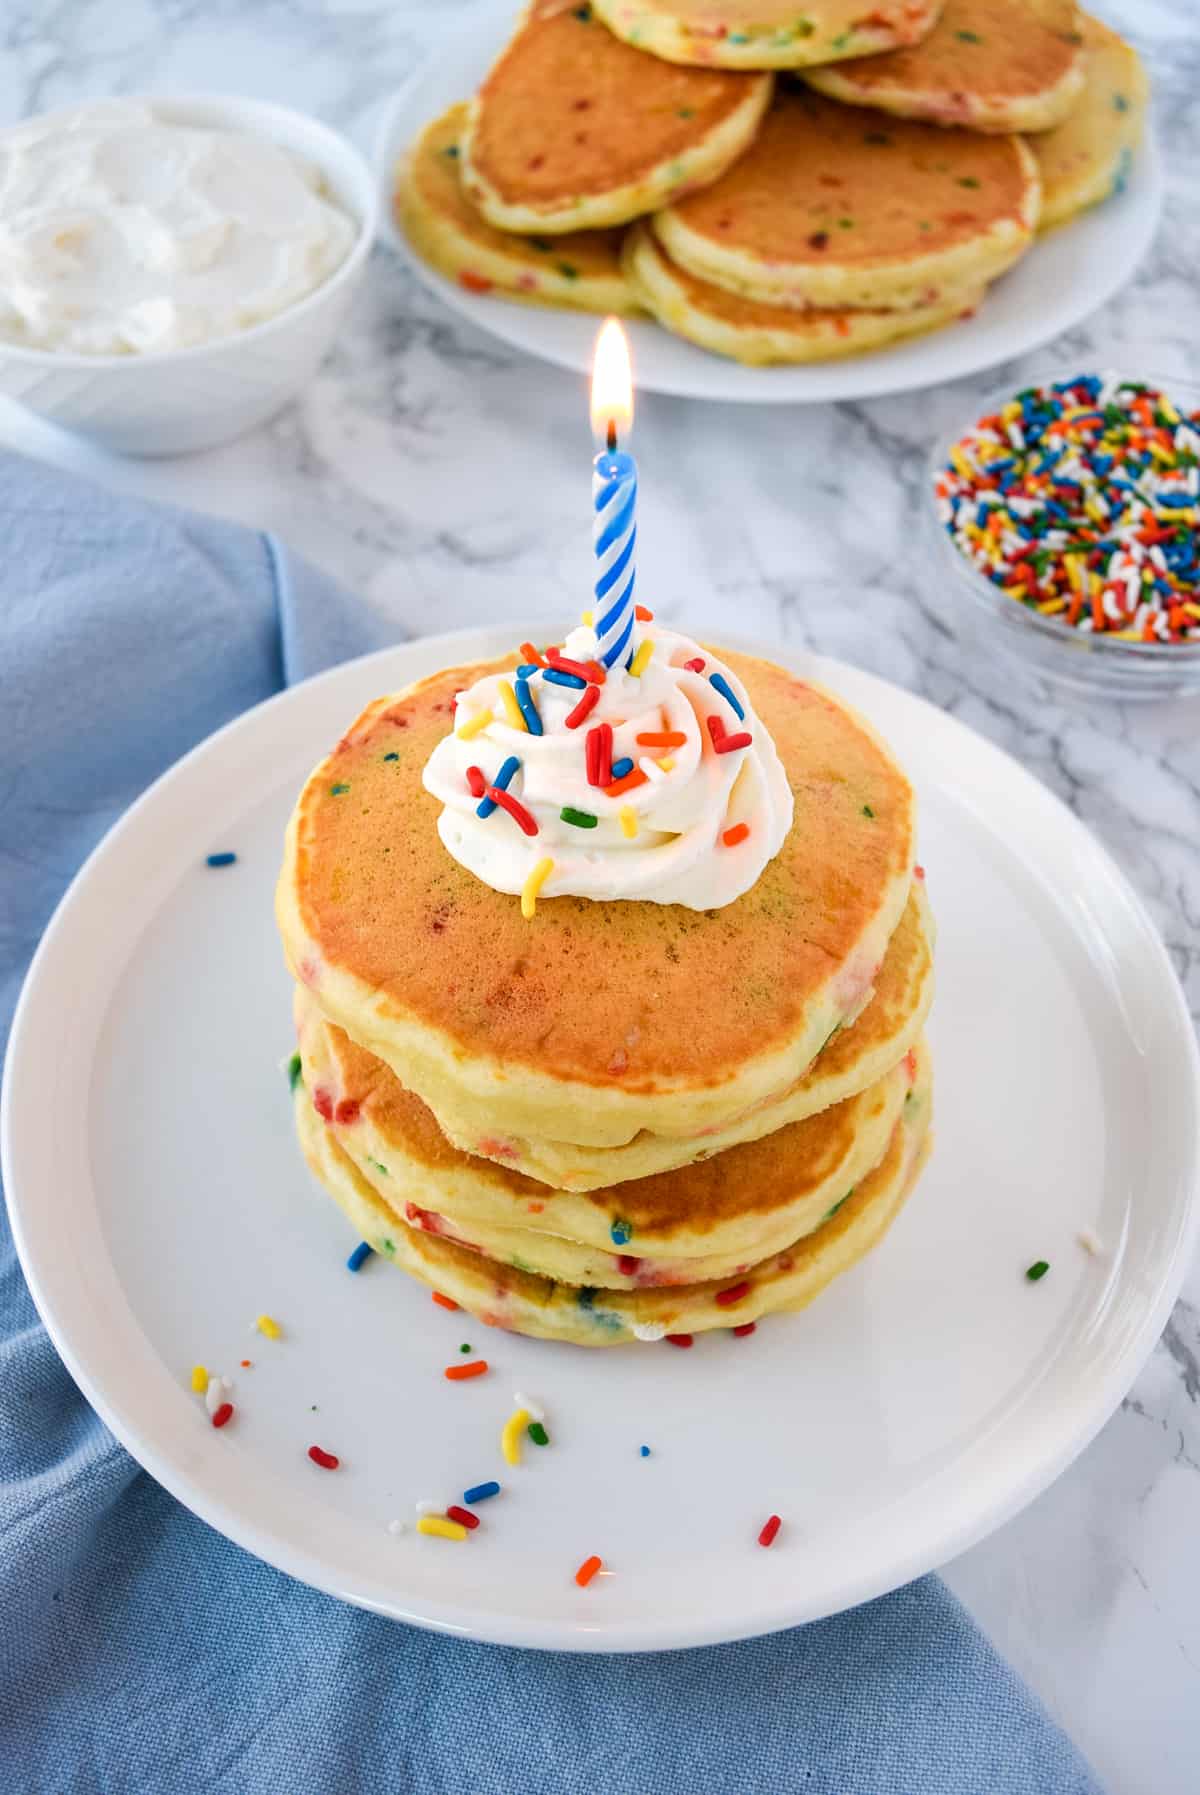 Stack of confetti pancakes with whipped cream and a birthday candle.